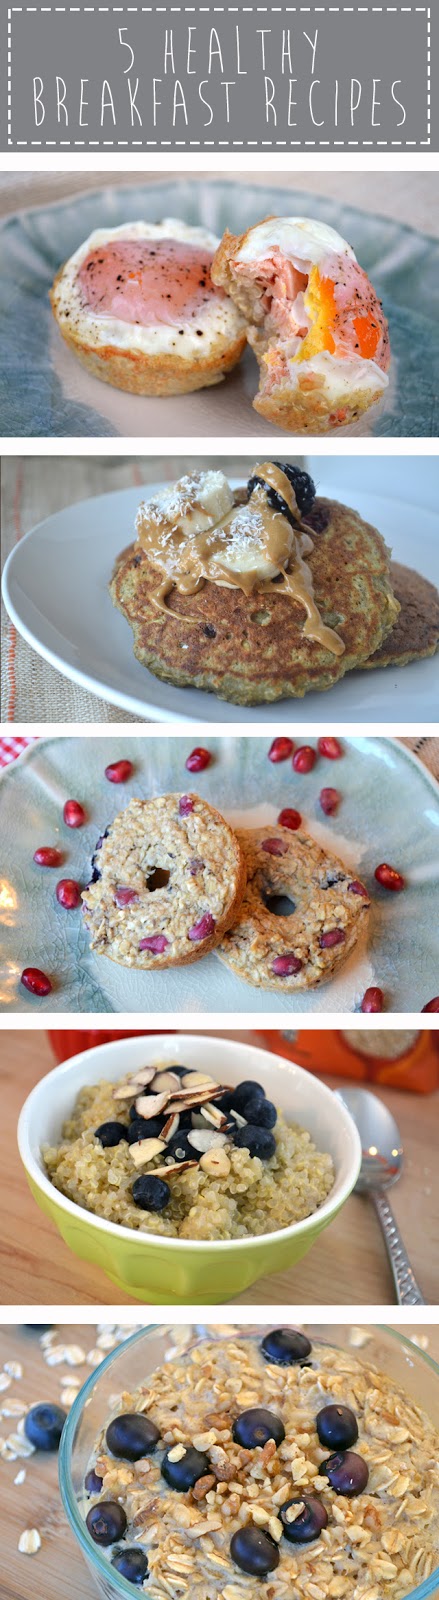 5 healthy breakfast recipes - Fit Foodie Finds